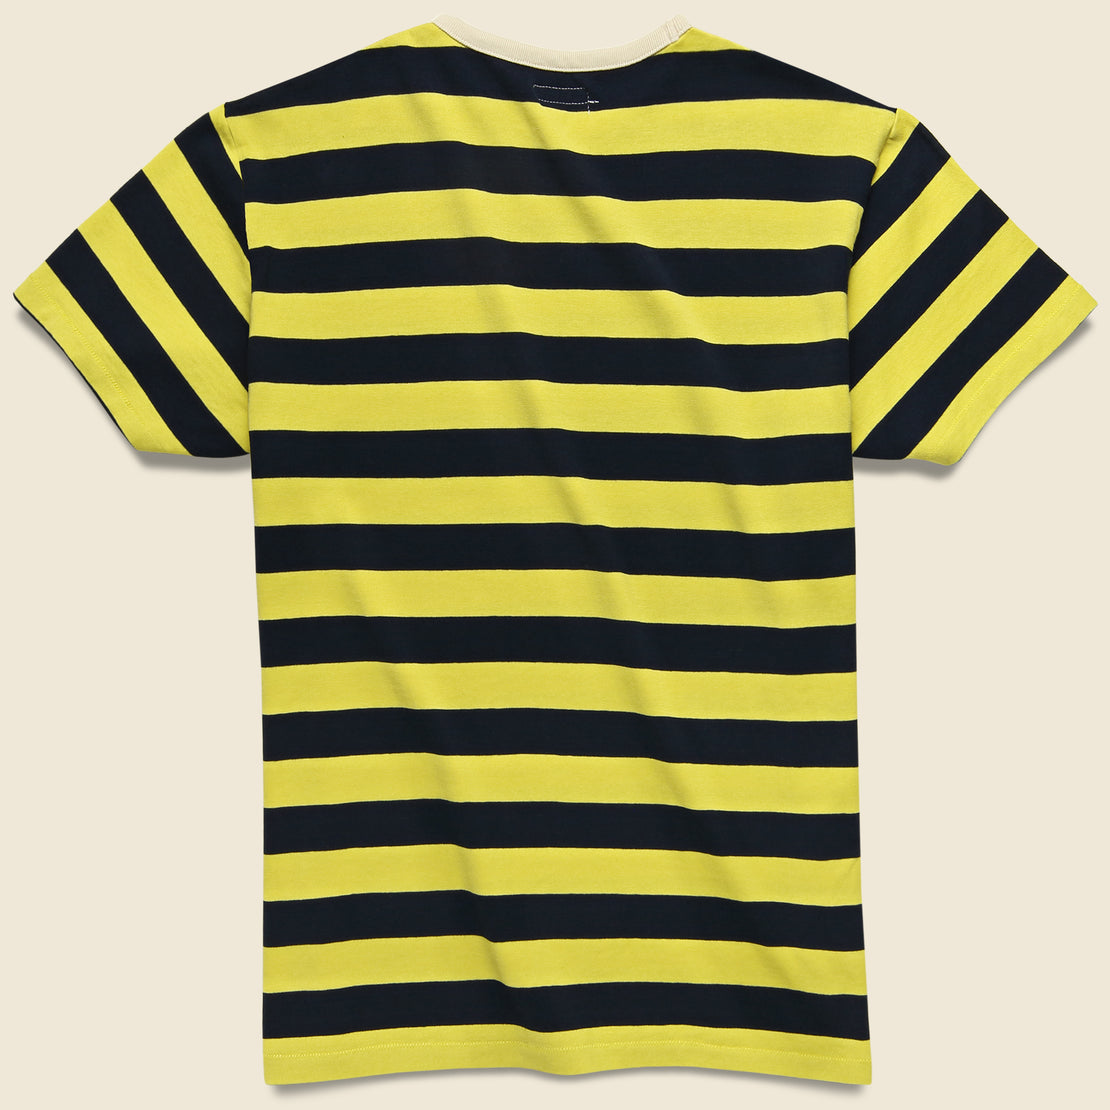 Mojave Striped Tee - Yellow/Blue - Knickerbocker - STAG Provisions - Tops - S/S Tee